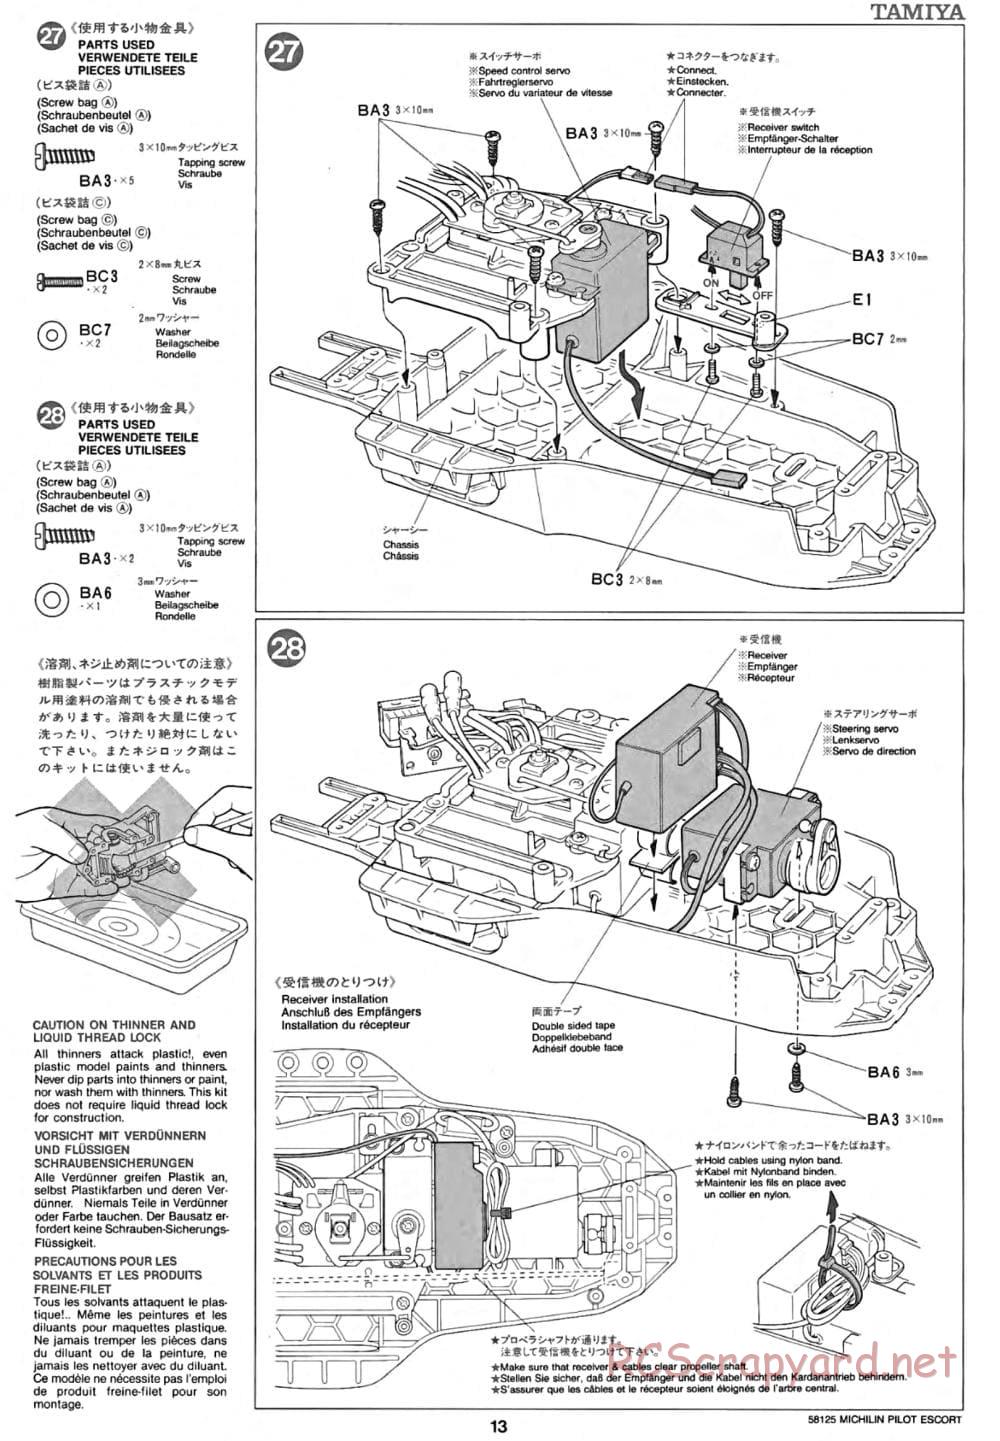 Tamiya - Michelin Pilot Ford Escort RS Cosworth - TA-01 Chassis - Manual - Page 13